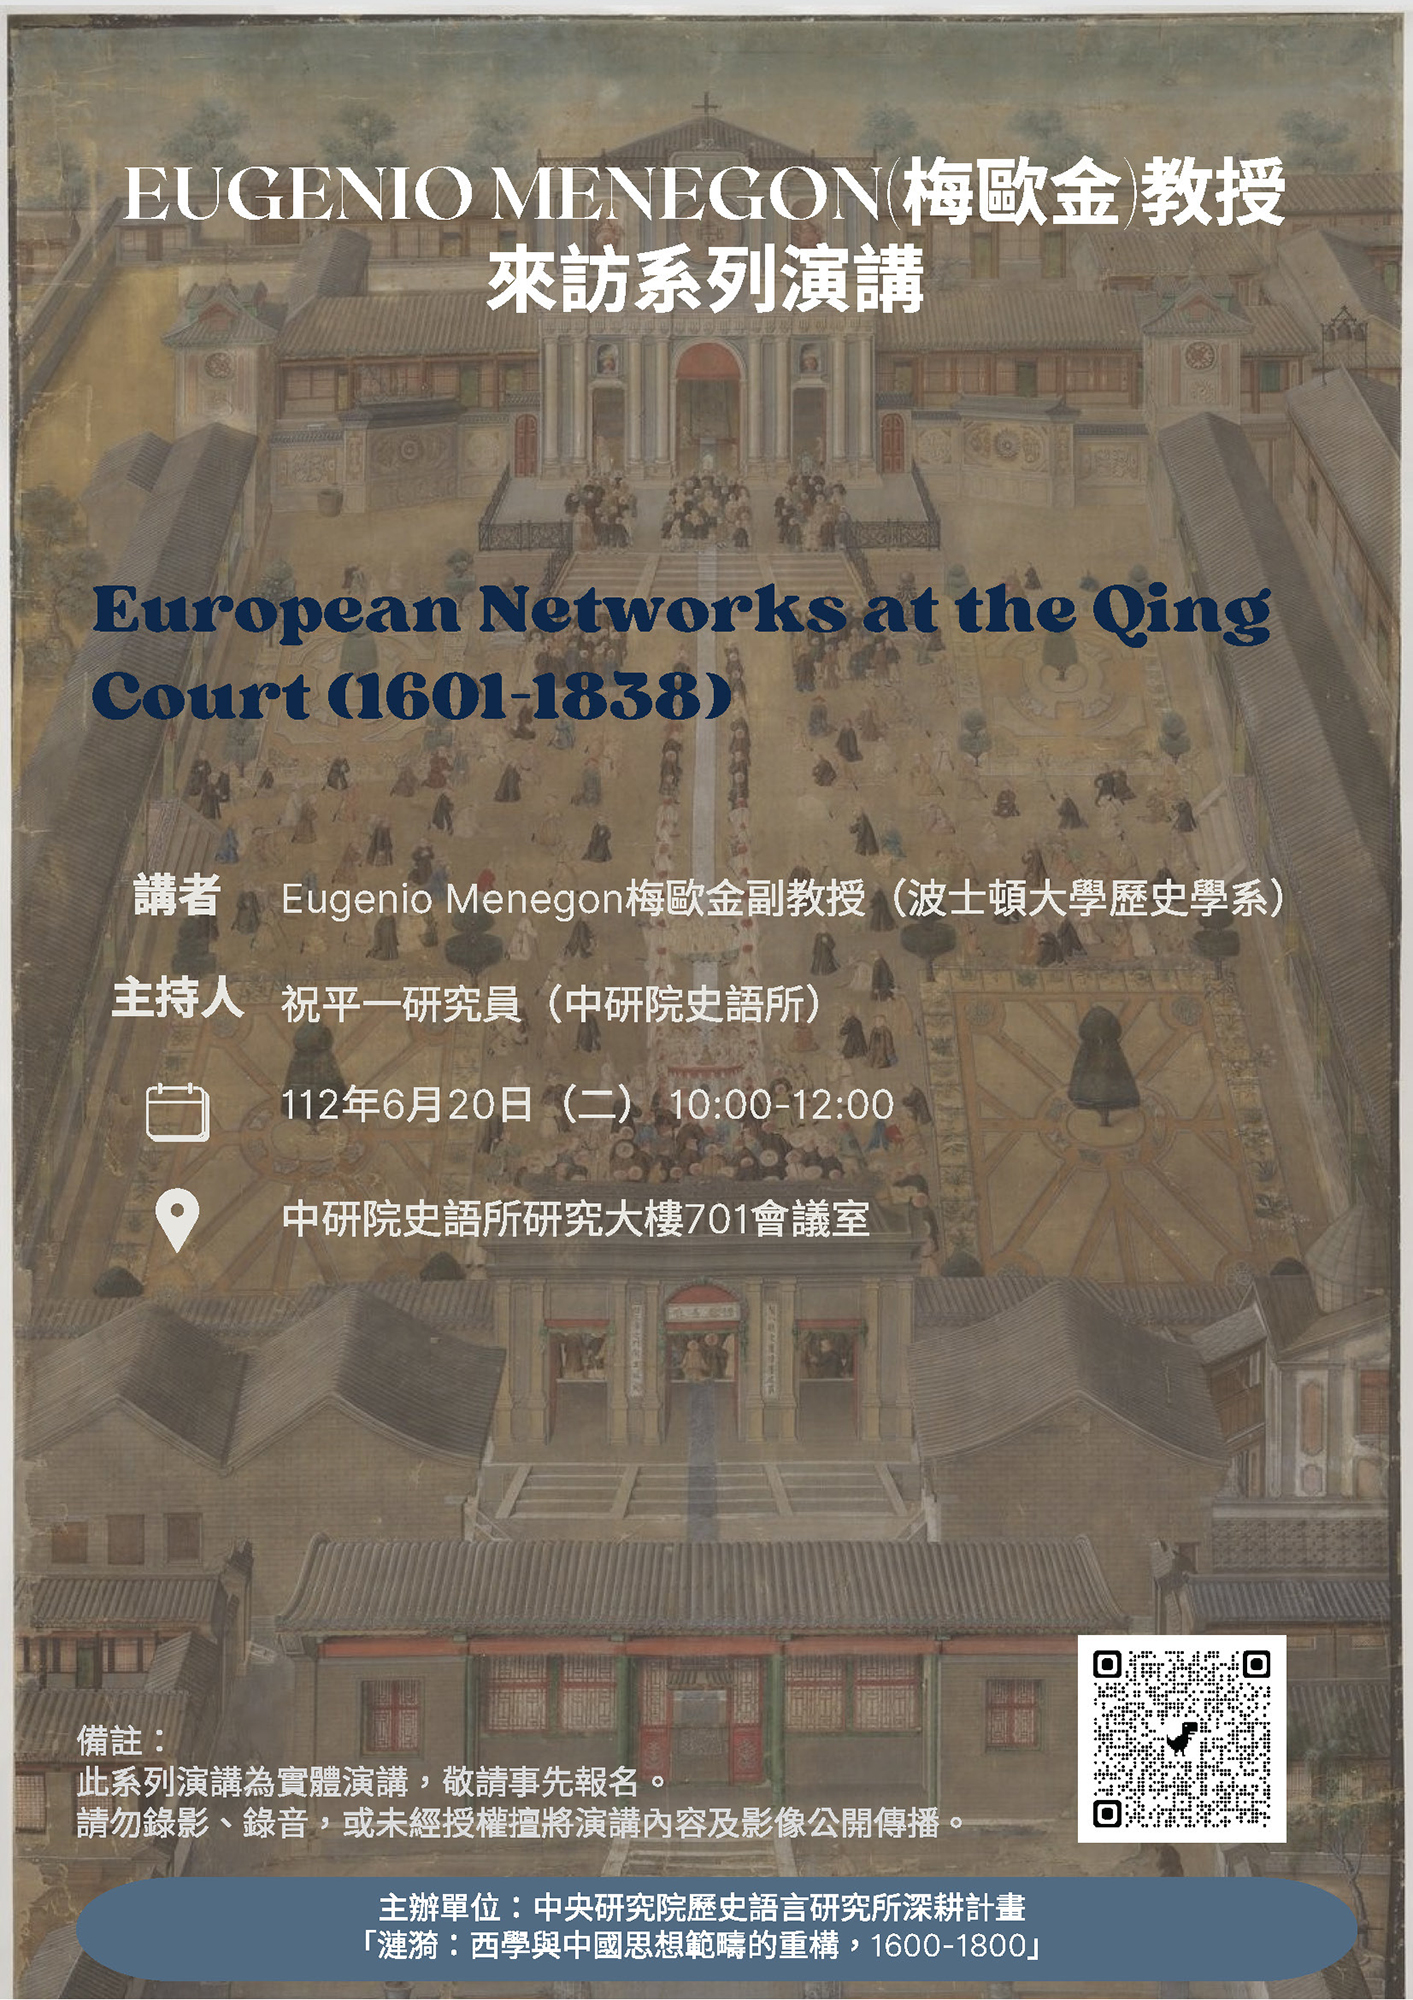 European Networks at the Qing Court (1601-1838)